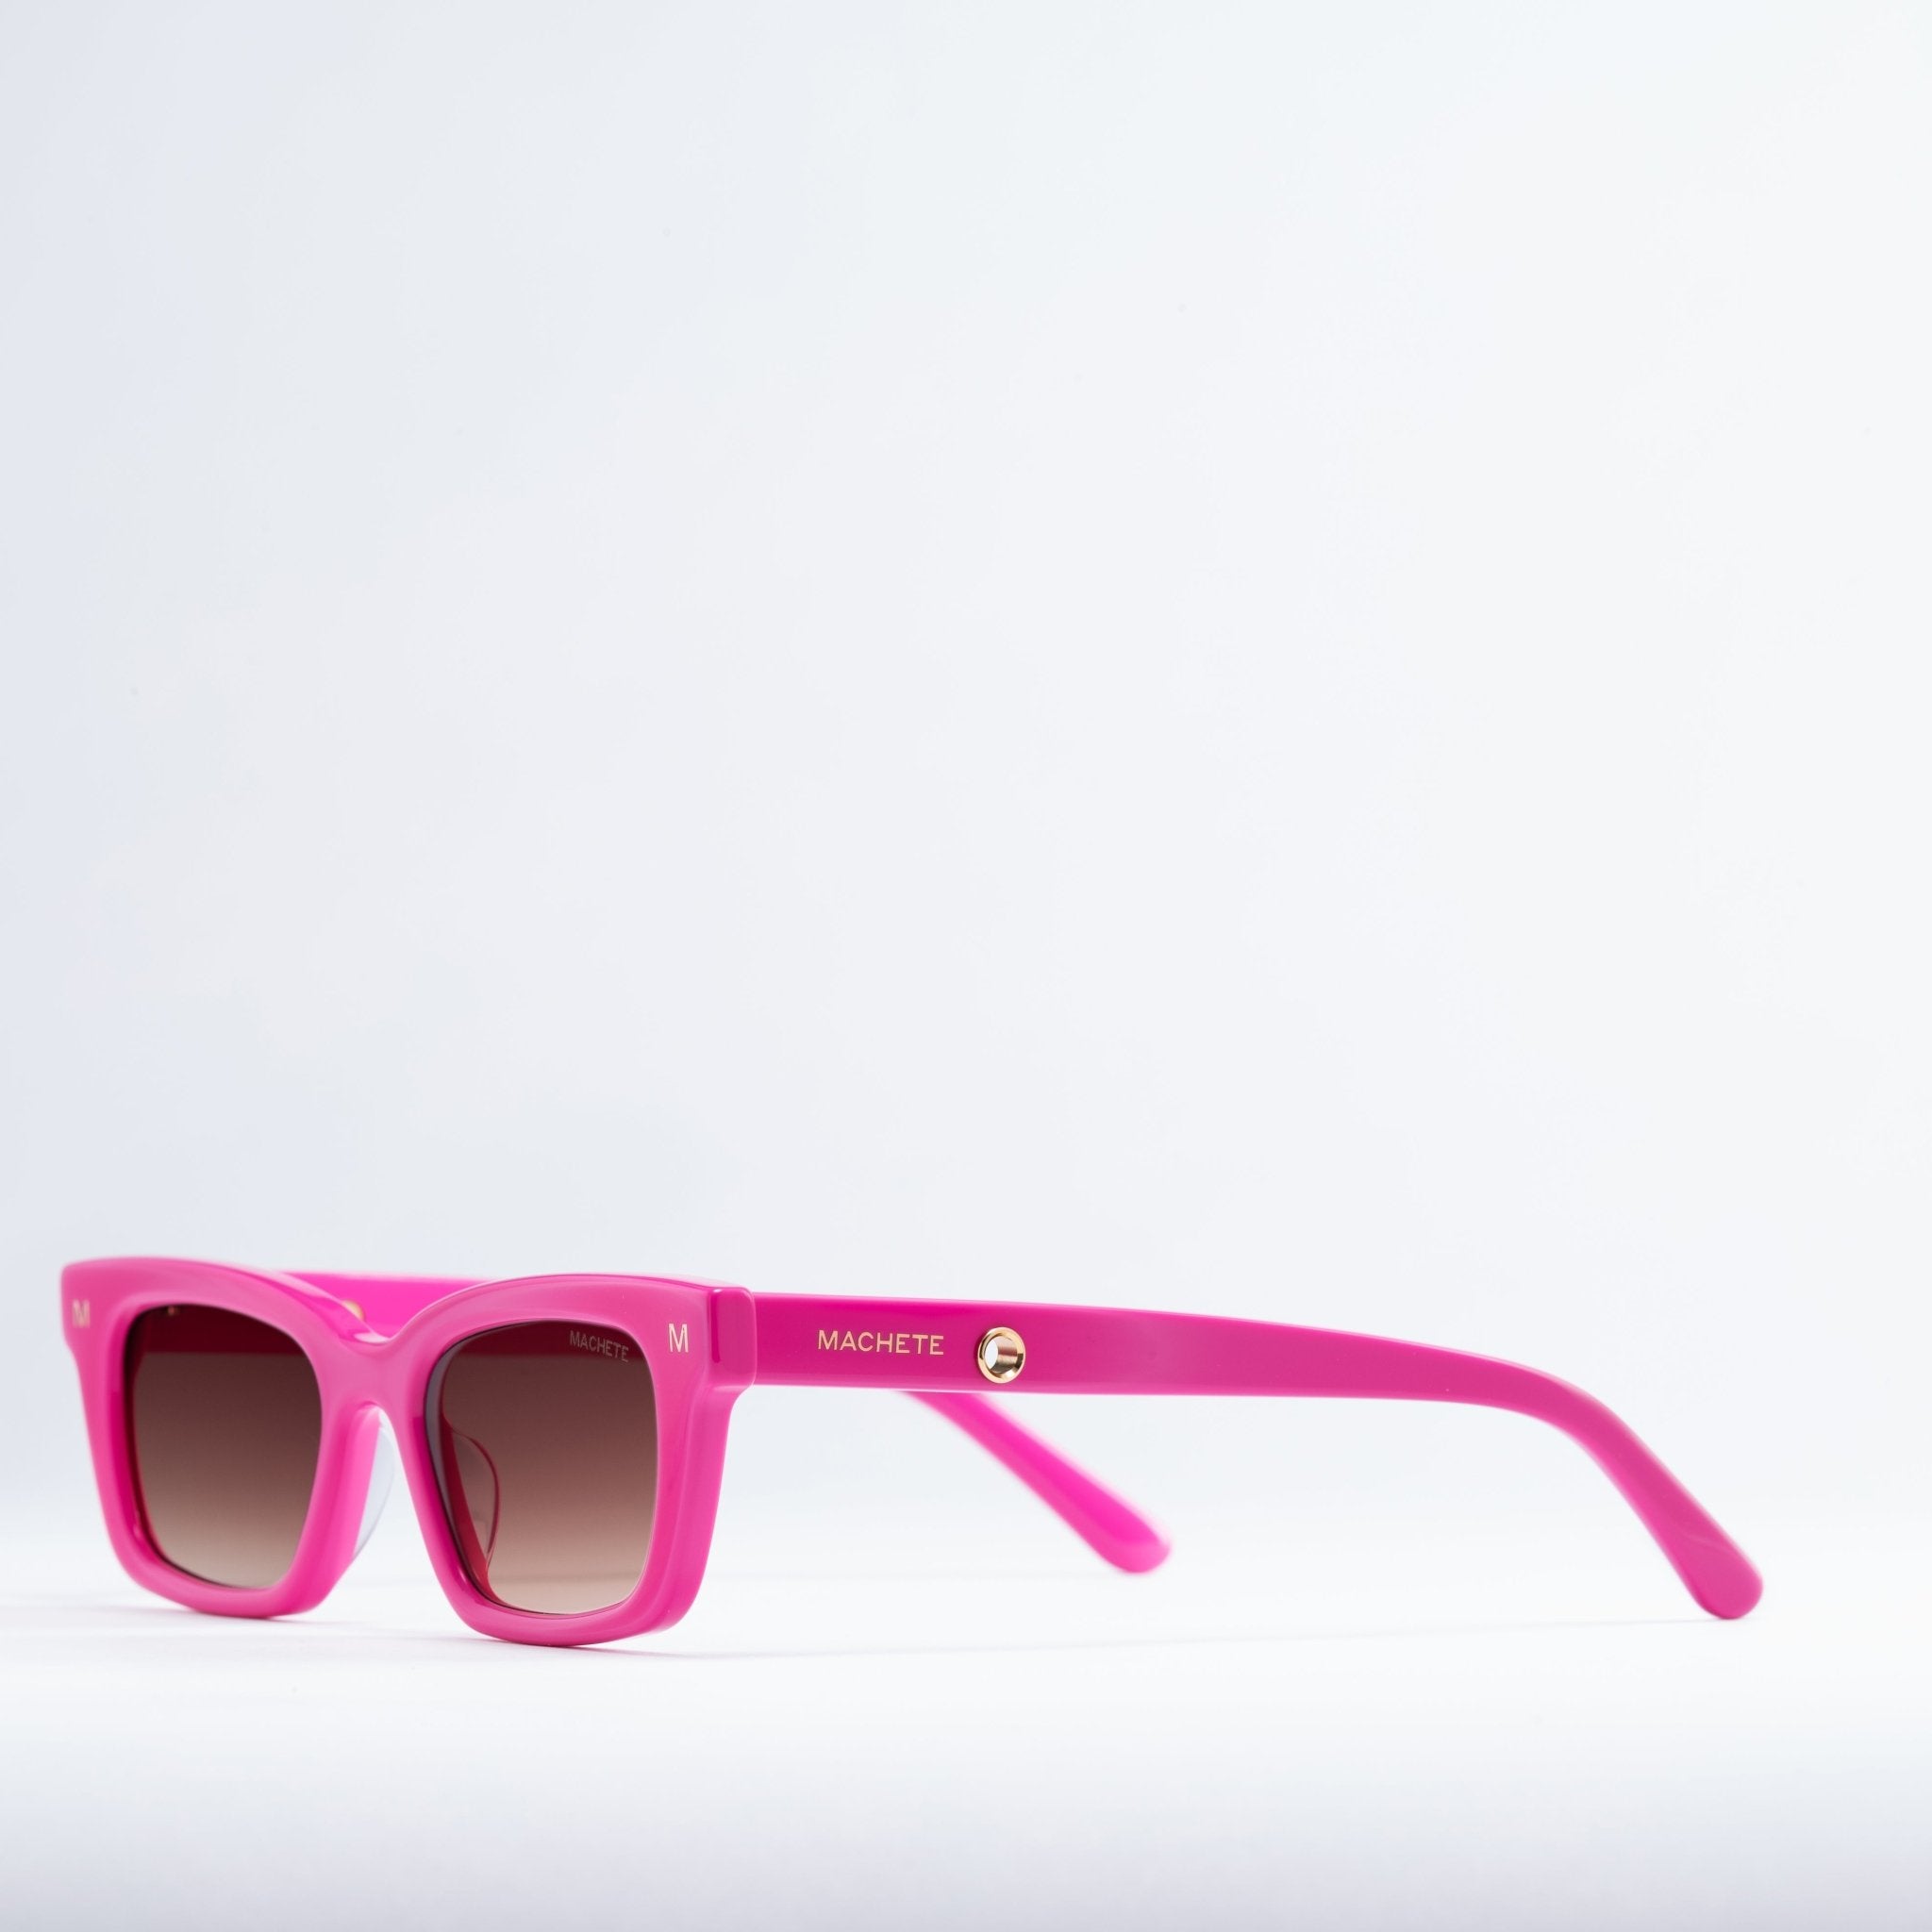 Neon Shutter Bliz Eyewear Set For Retro Party Favors, Disco Birthdays, And  Decorations In 80s And 90s Shades From Amazing8888, $2.02 | DHgate.Com